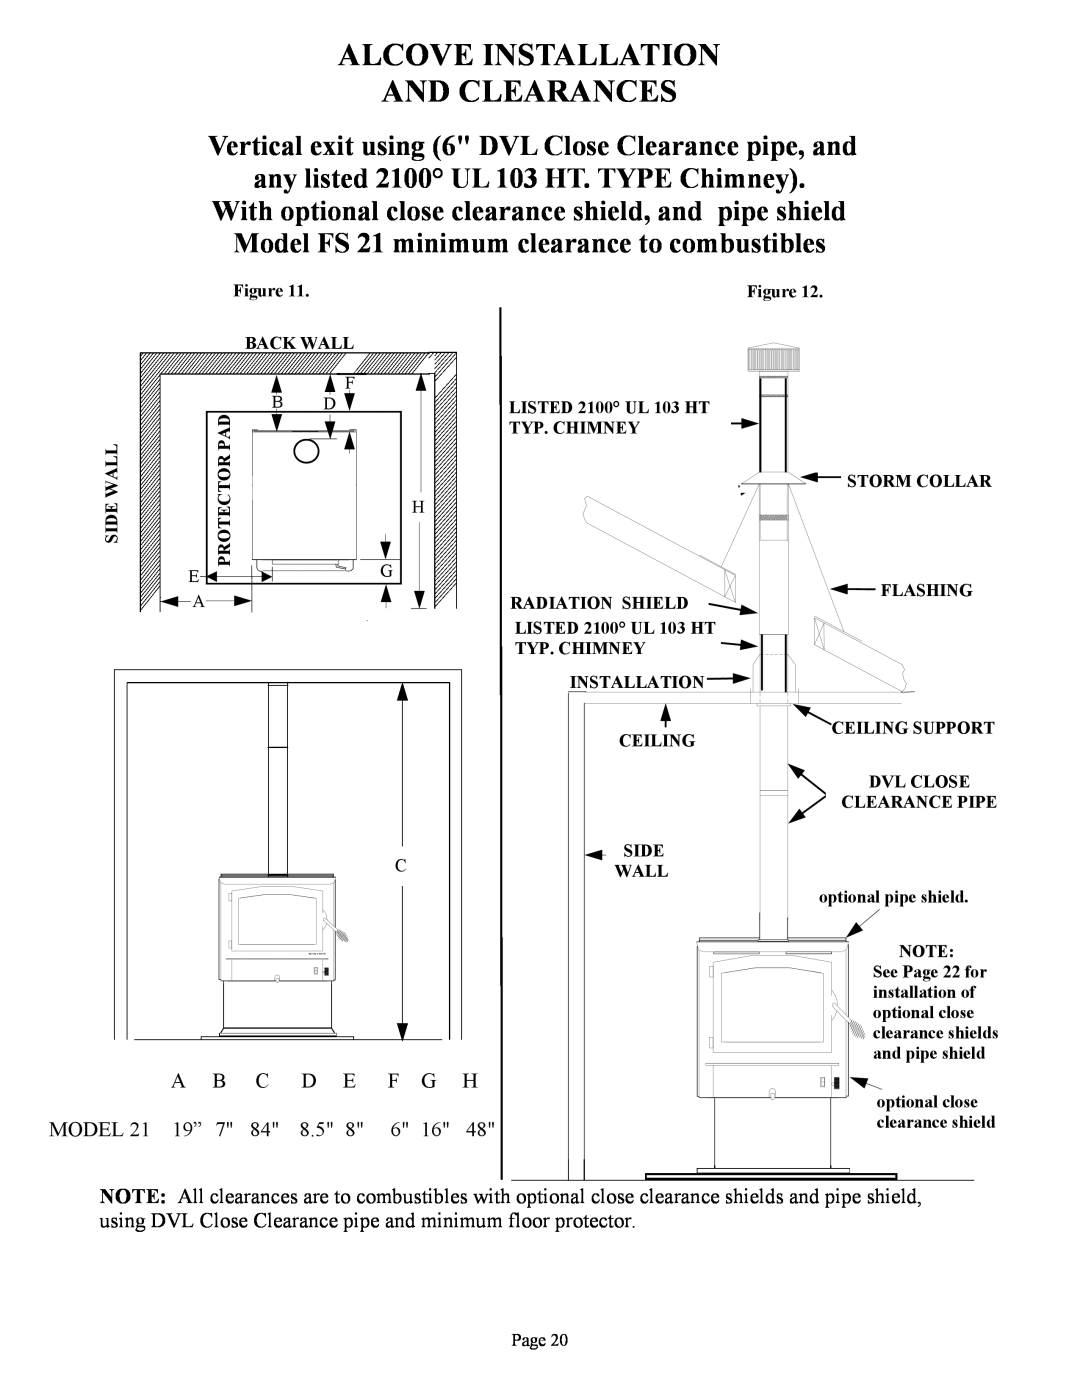 New Buck Corporation FS 21 installation instructions Alcove Installation And Clearances, Model, F G H 6 16 